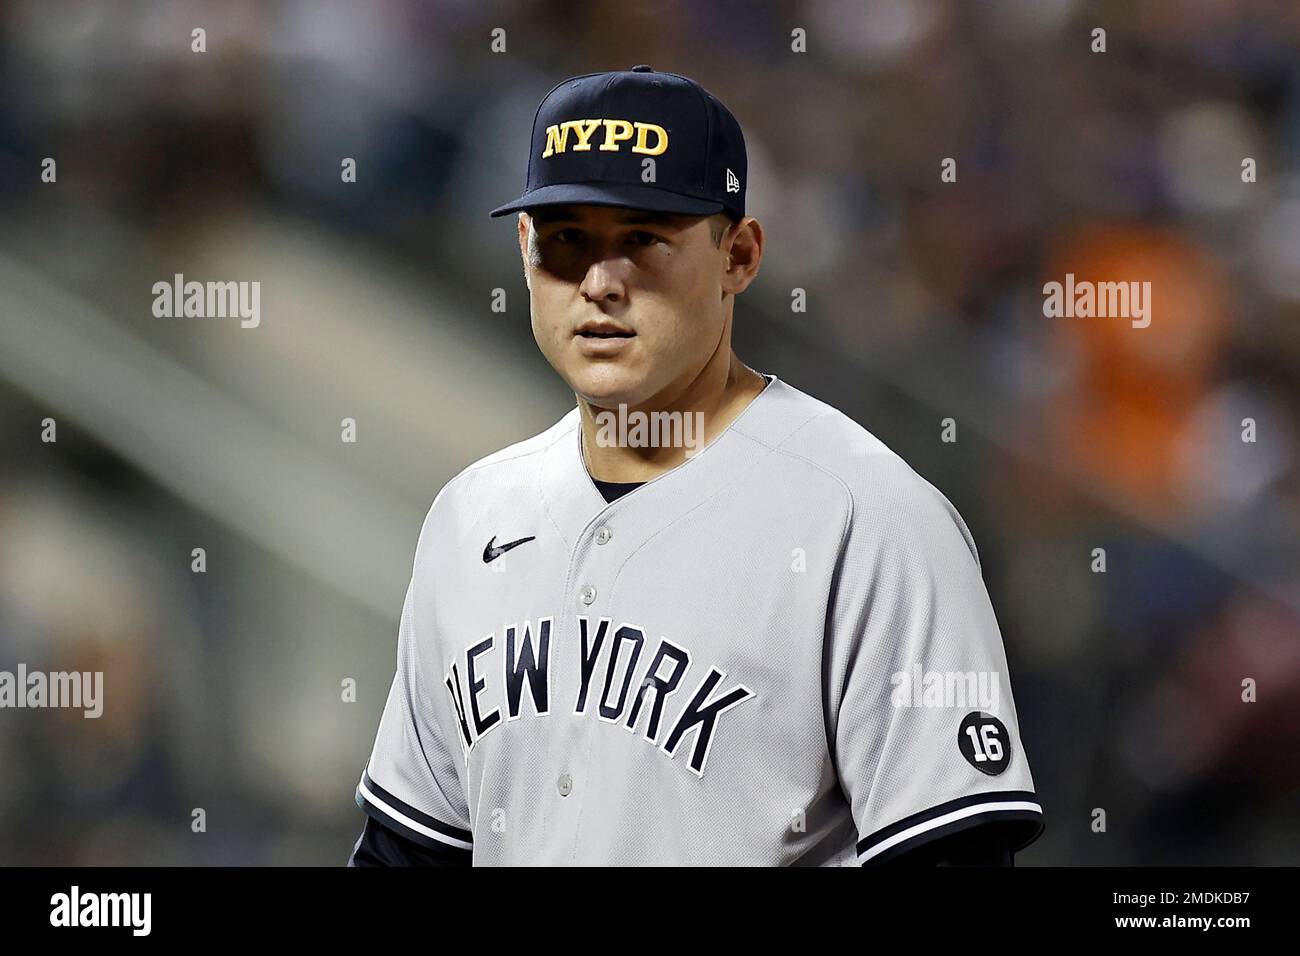 New York Yankees first baseman Anthony Rizzo looks on in an NYPD hat  against the New York Mets during the seventh inning of a baseball game on  Saturday, Sept. 11, 2021, in